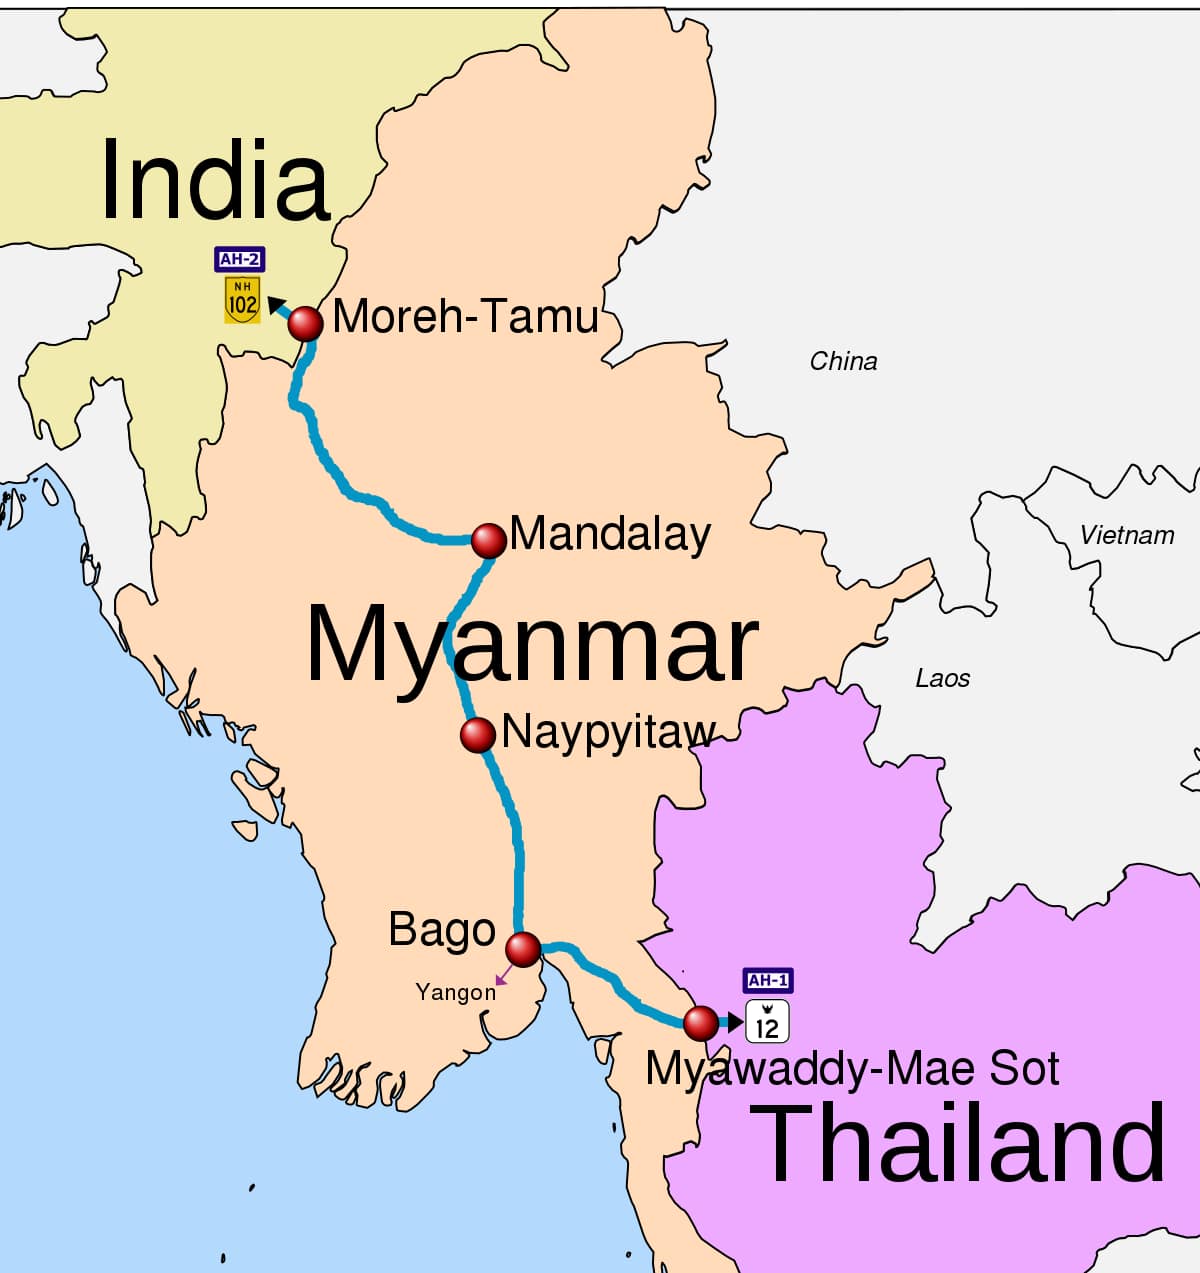 Trilateral Highway India Myanmar Thailand